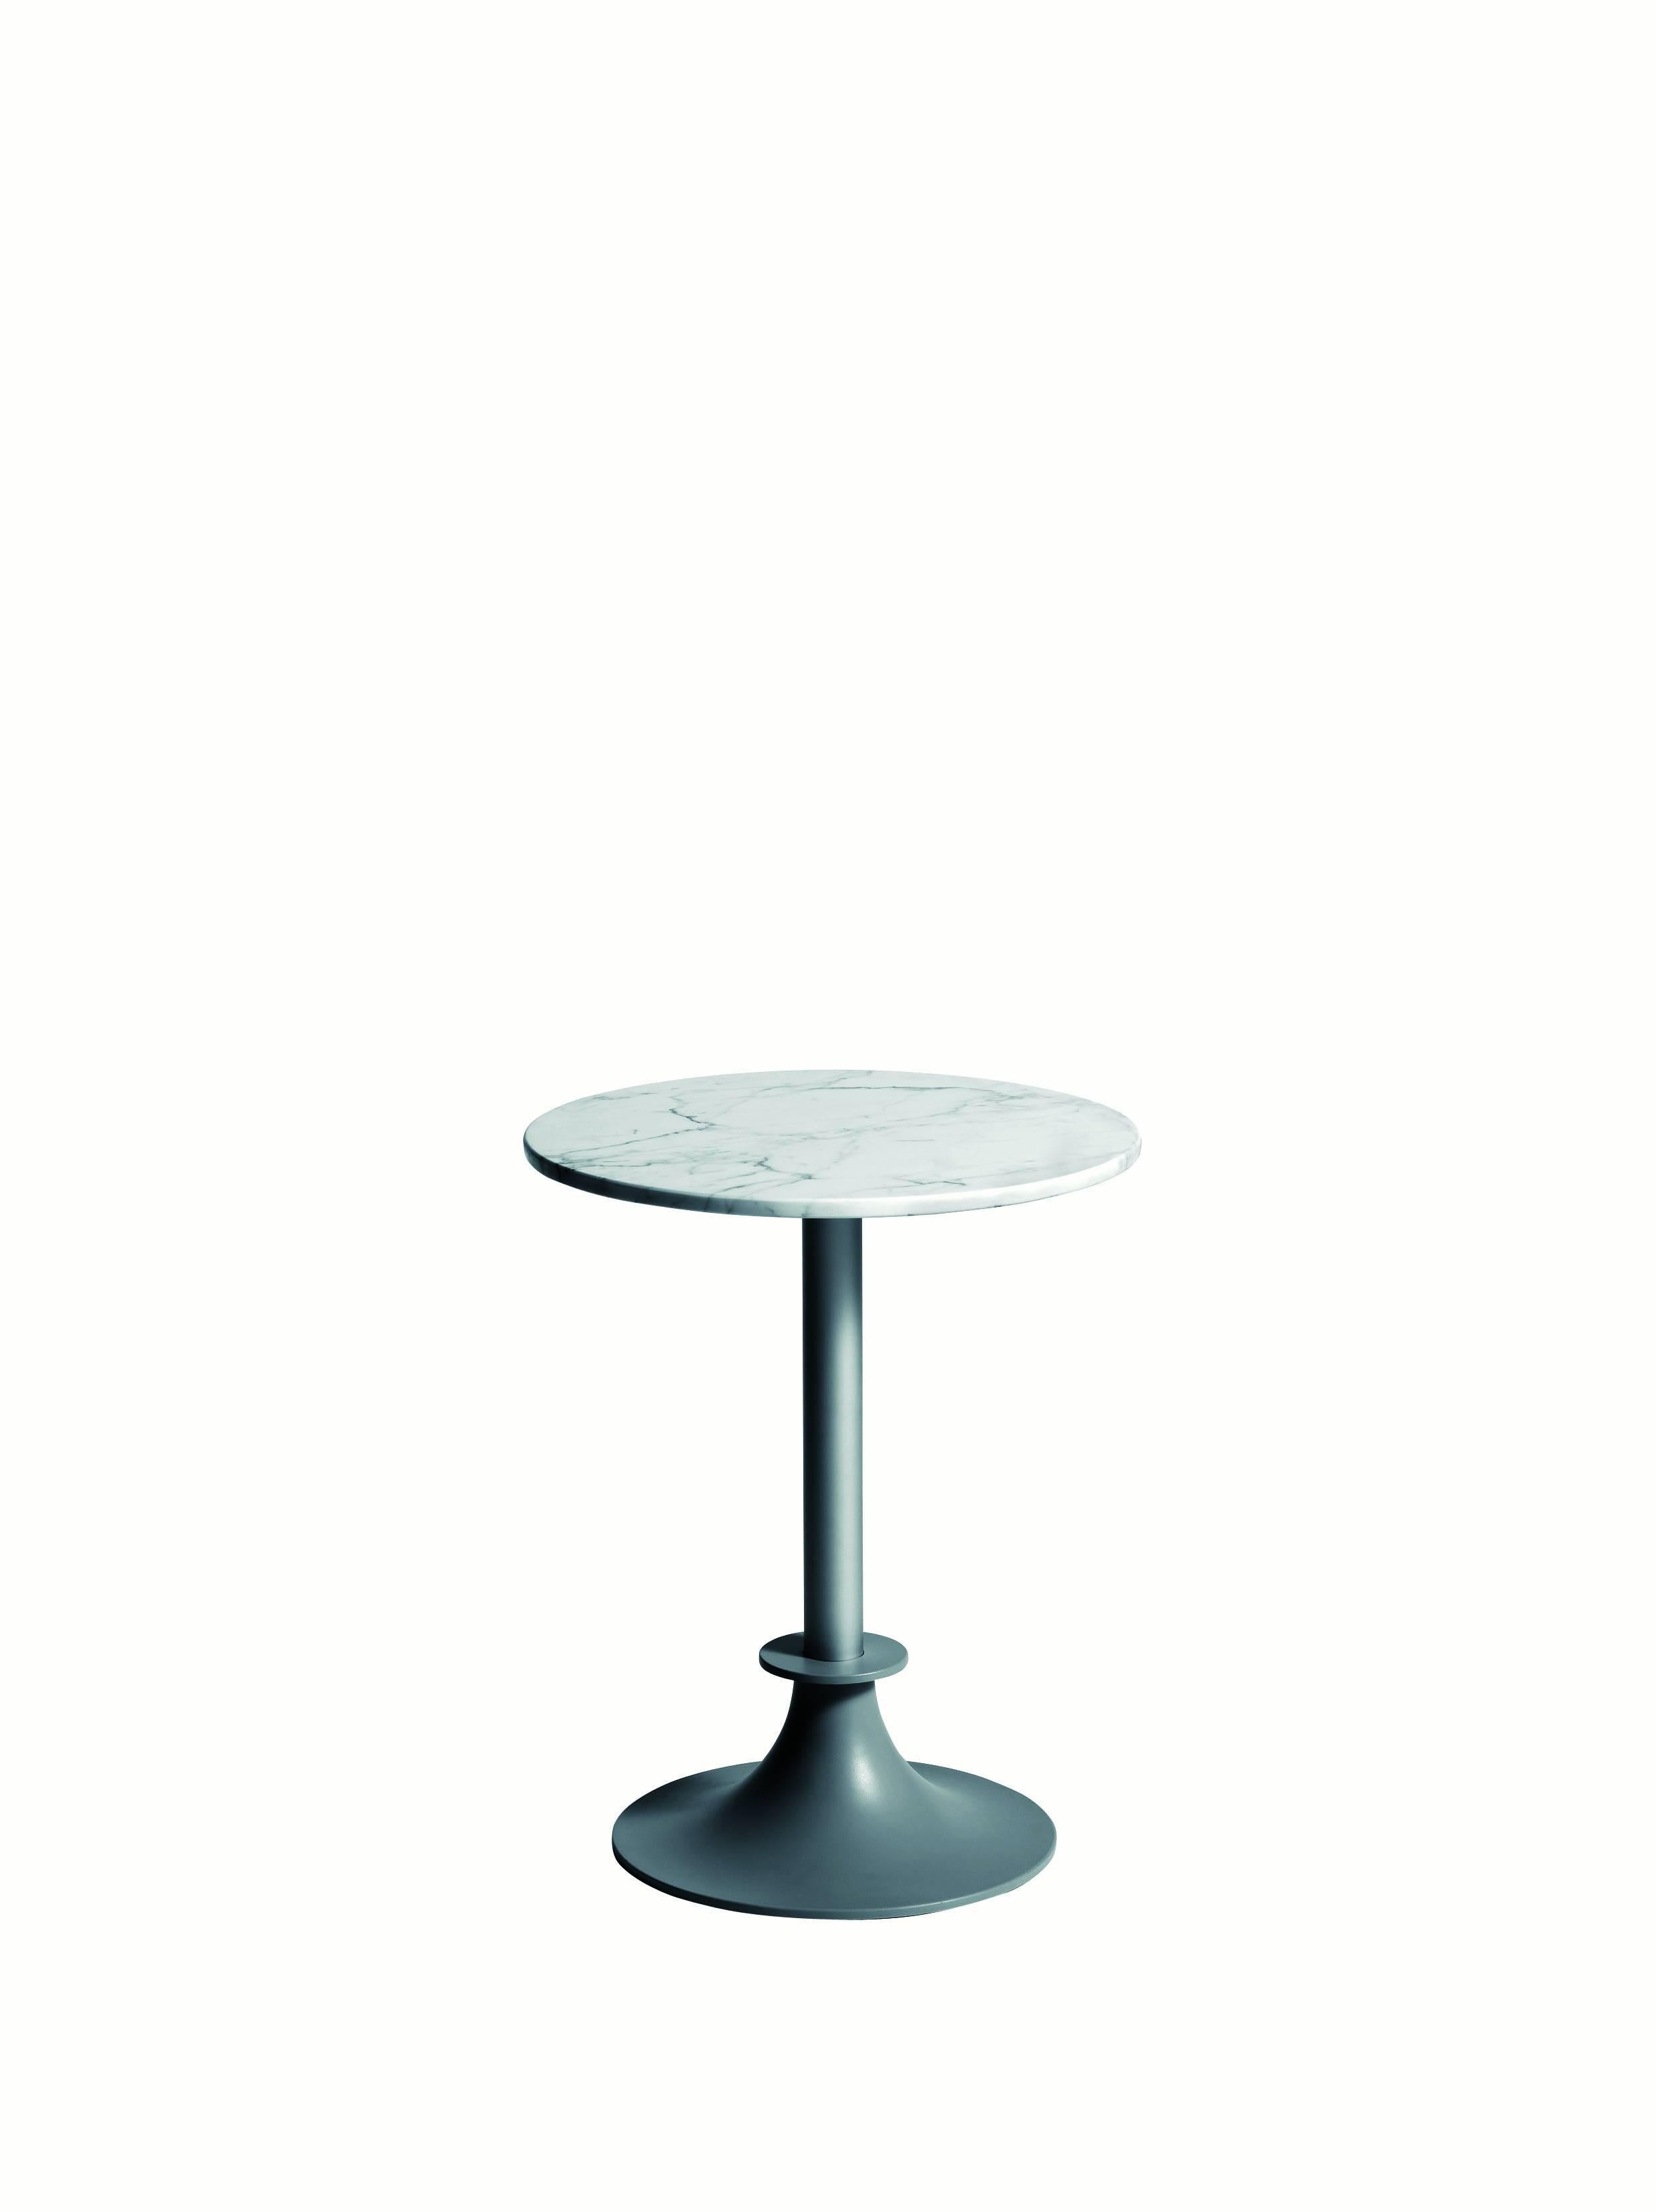 Italian Lord YI Tables by Philippe Starck, Available in Black or White Marble Top For Sale